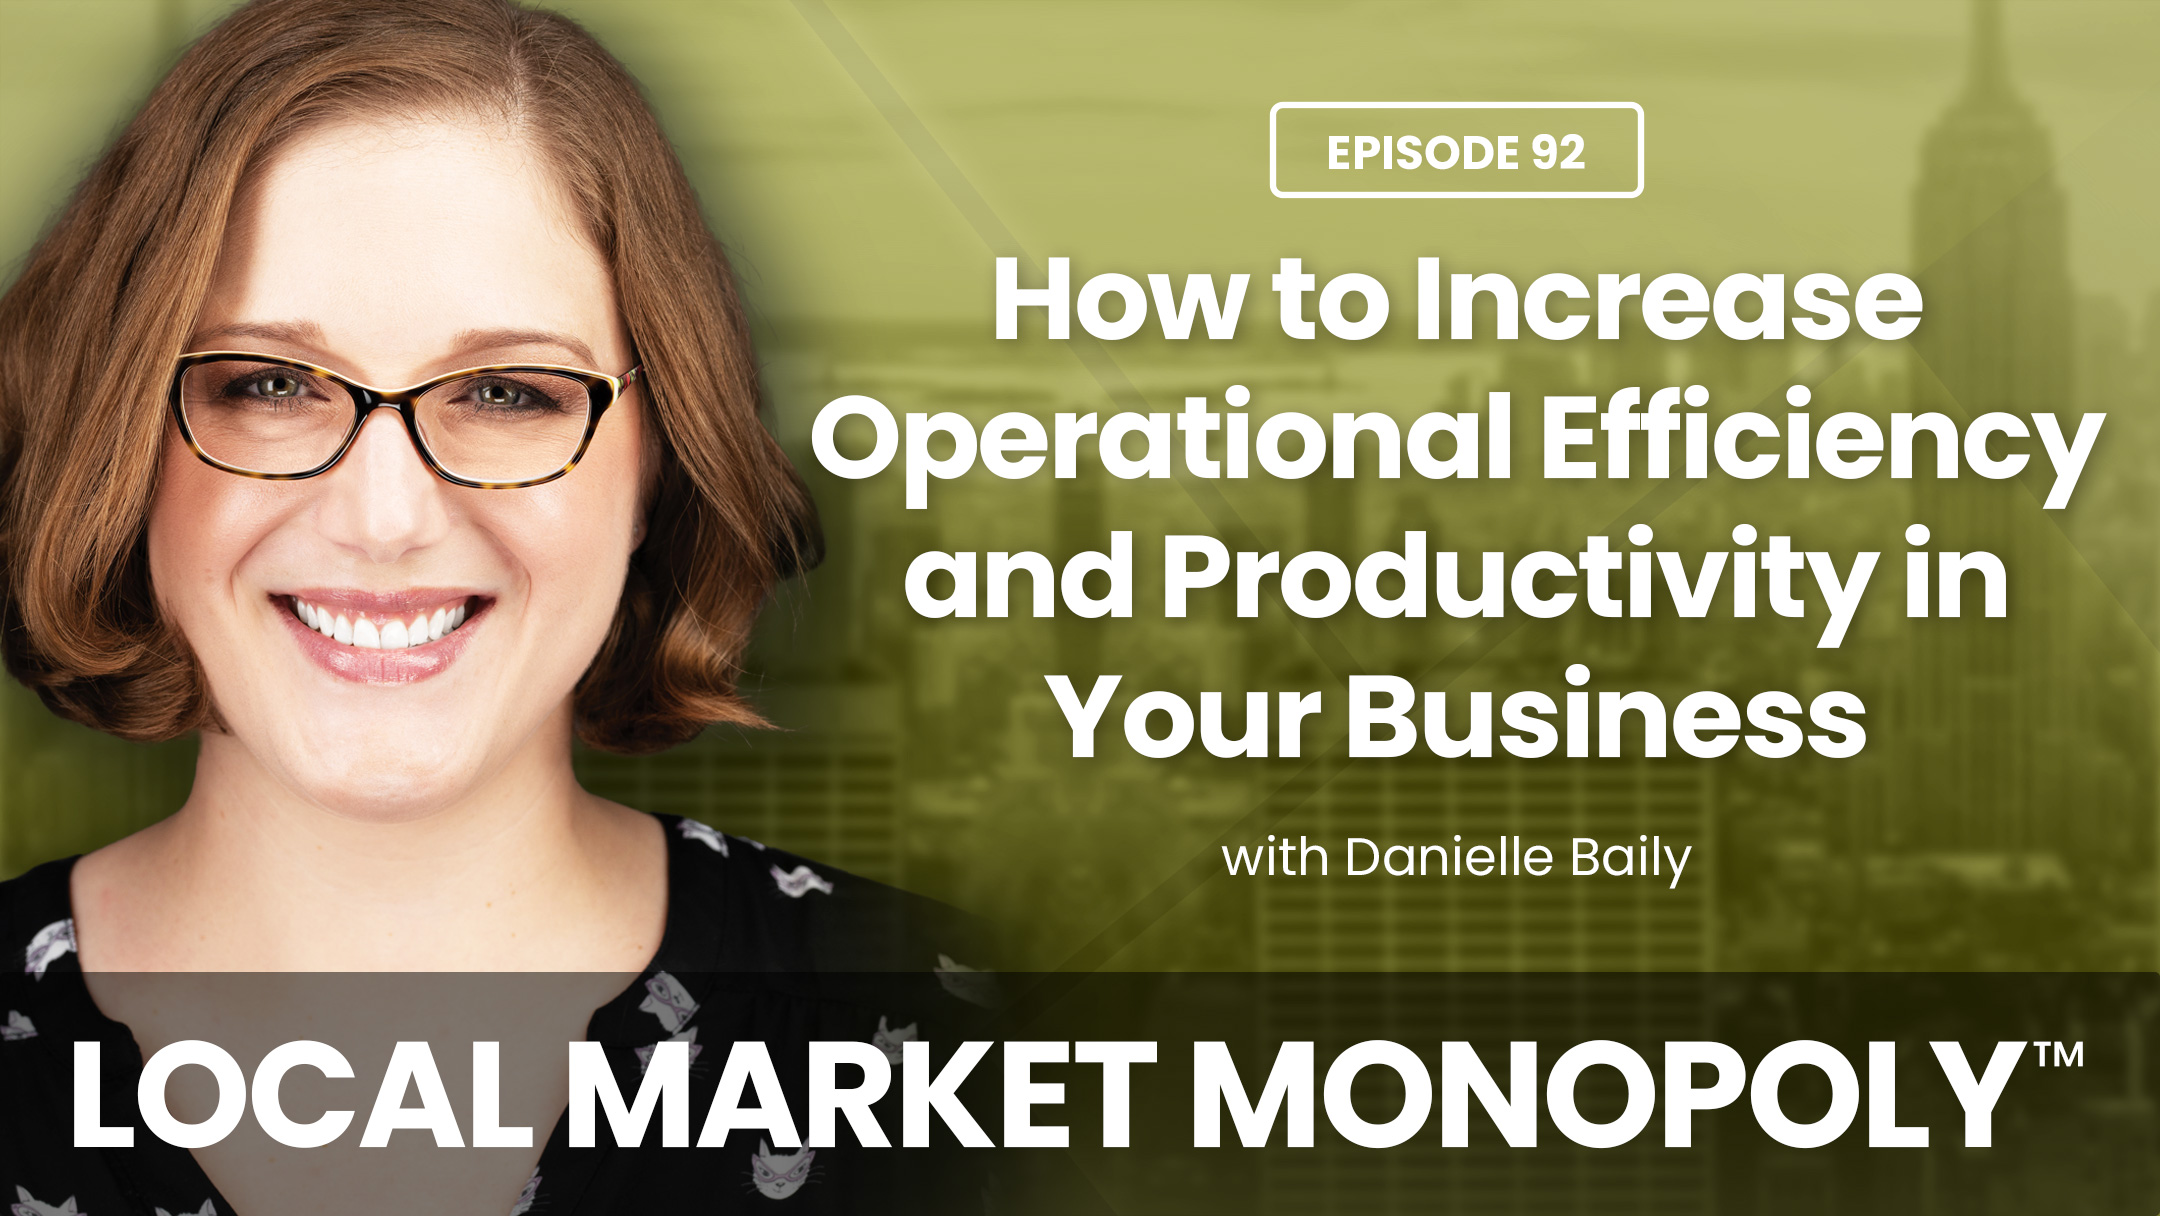 How to Increase Operational Efficiency and Productivity in Your Business